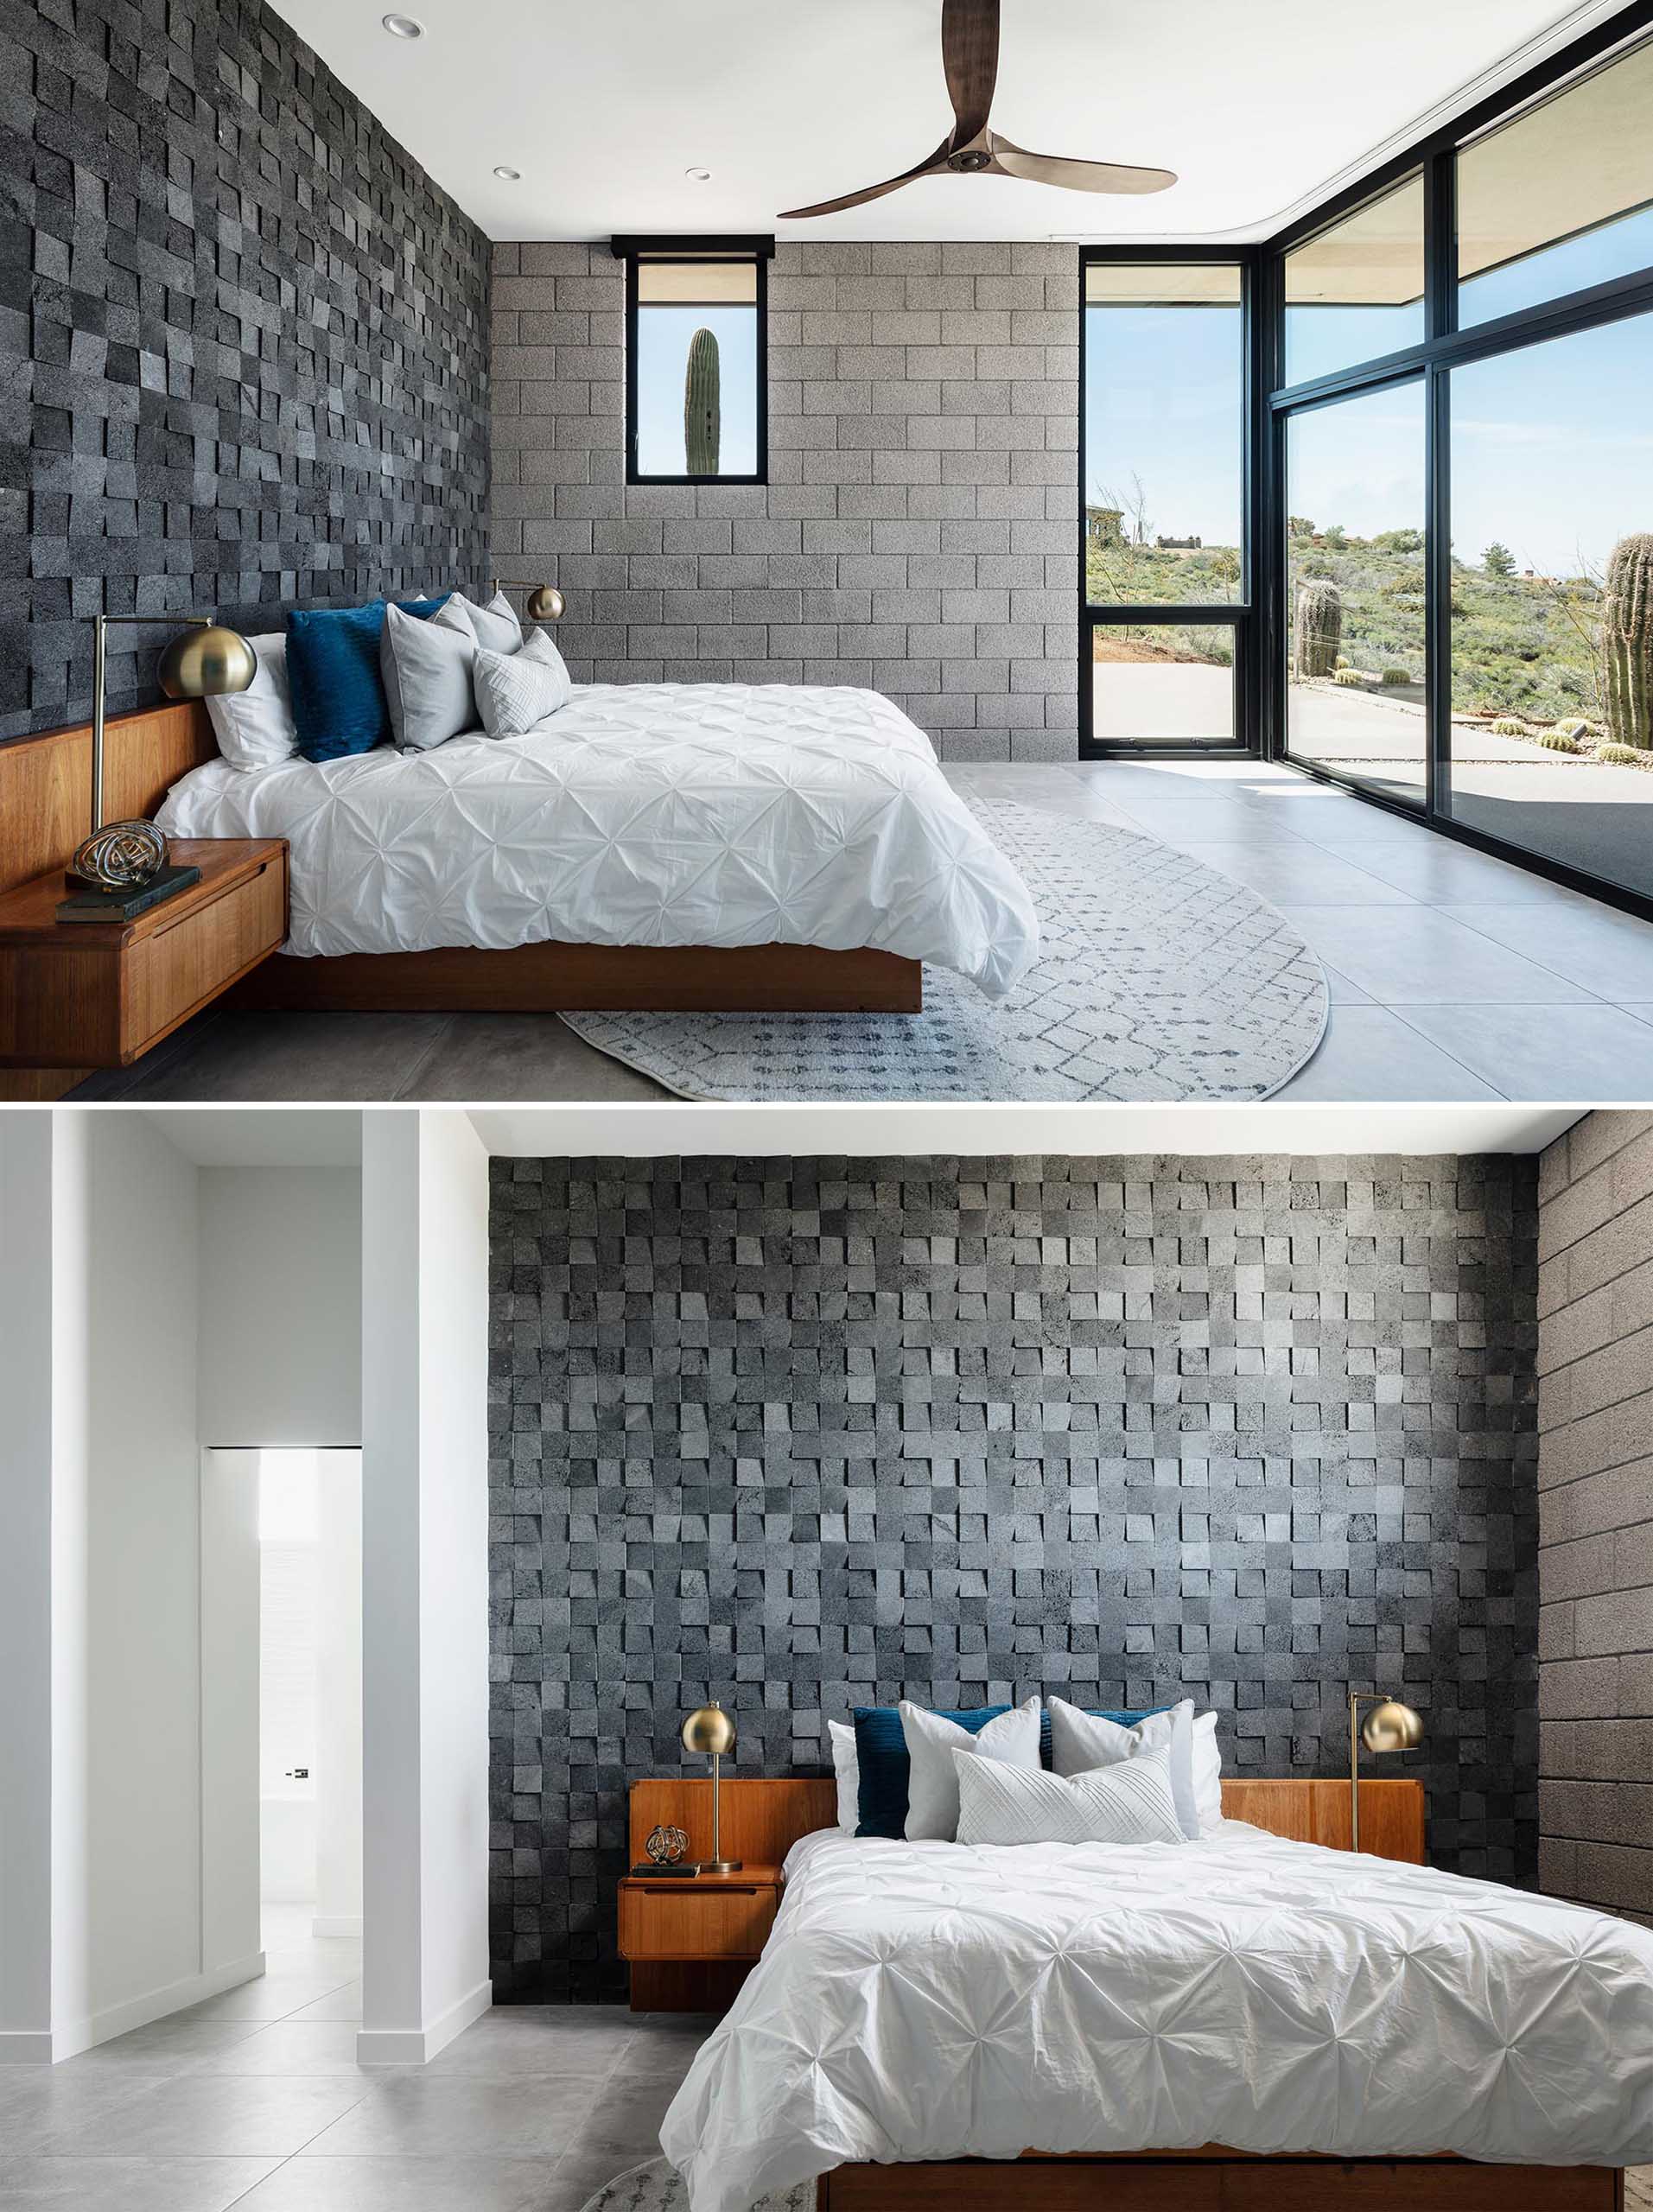 This modern master bedroom suite has views to the desert beyond through the large windows, while the accent wall is made from 3d lava rock tile.